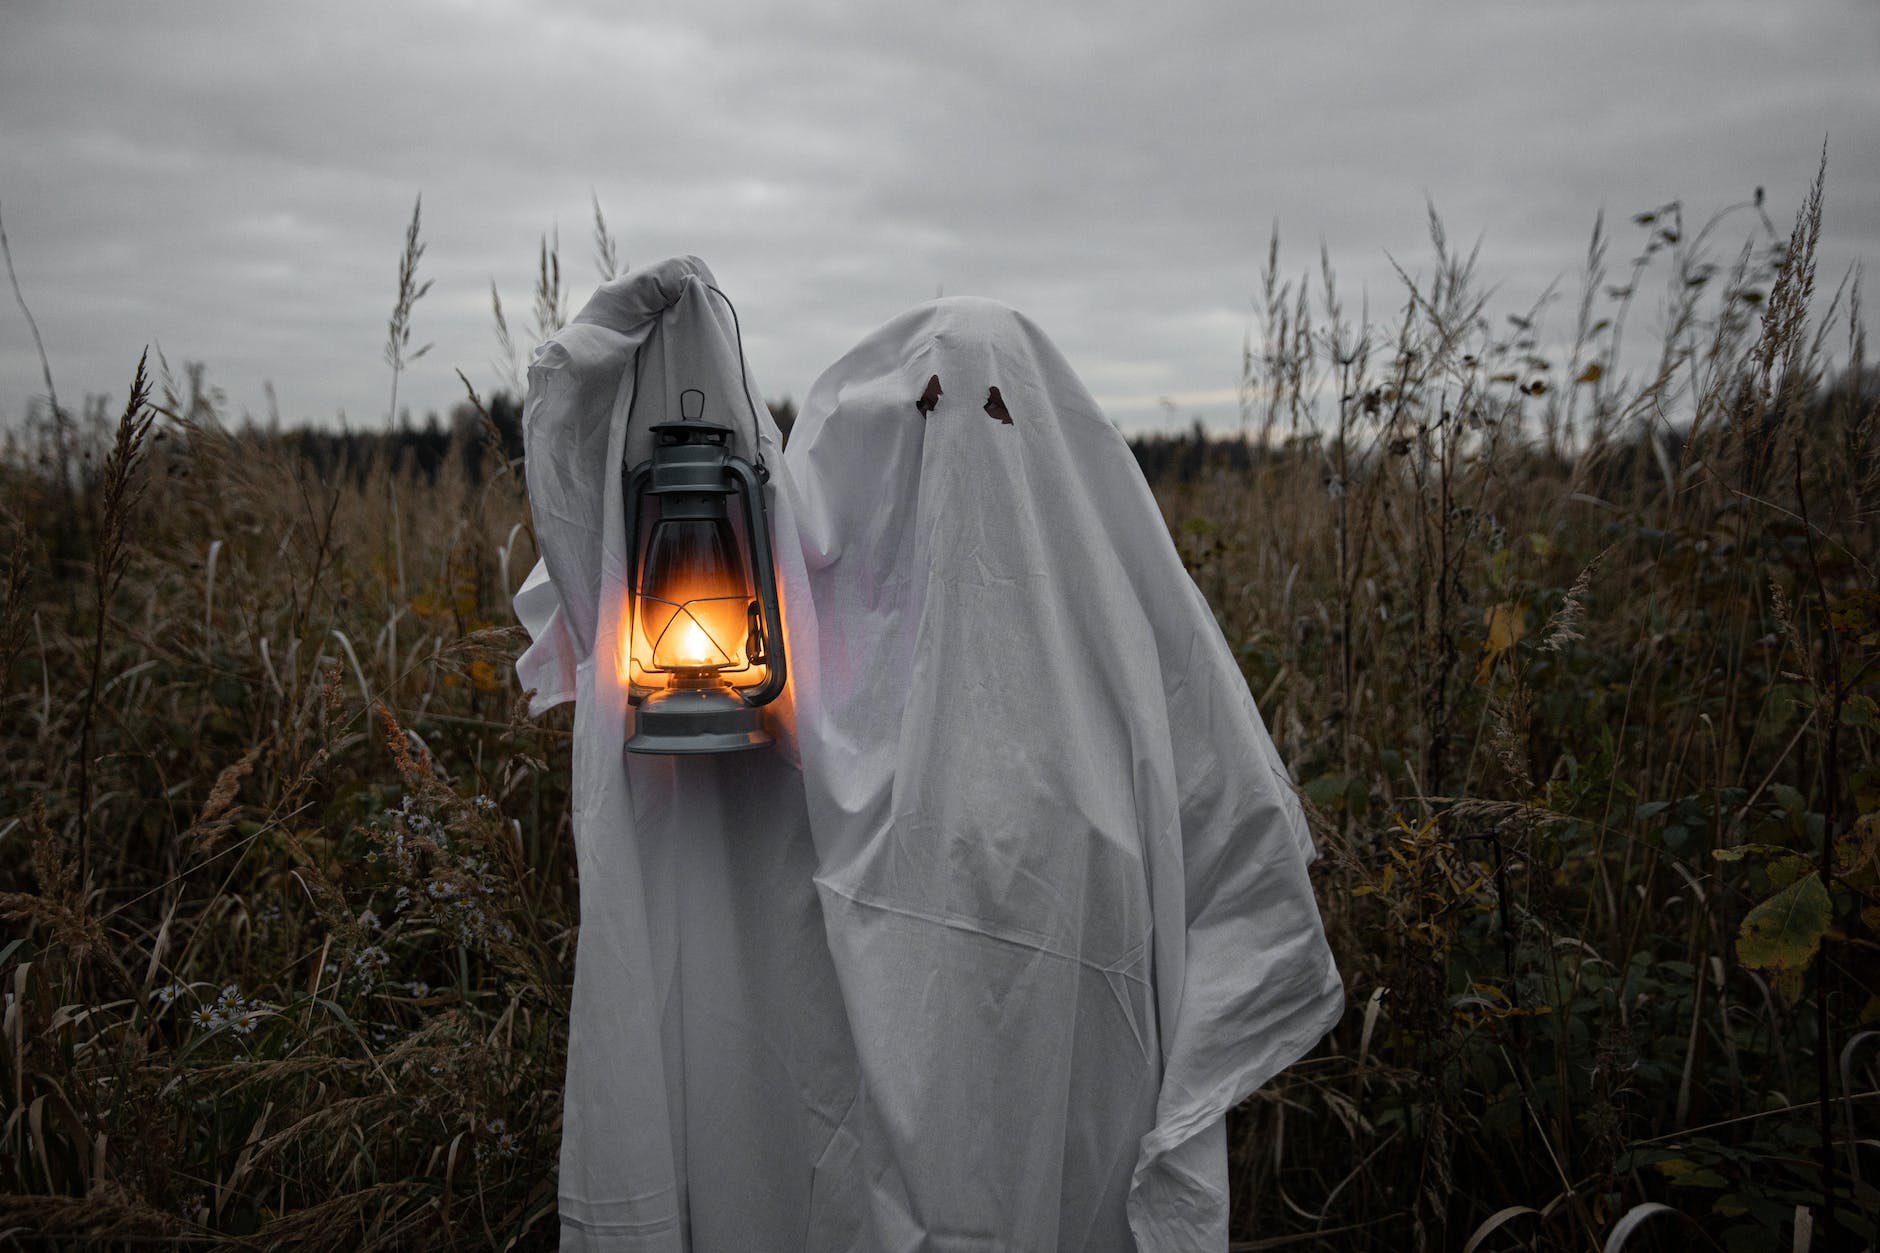 personin ghost costume holding a lantern